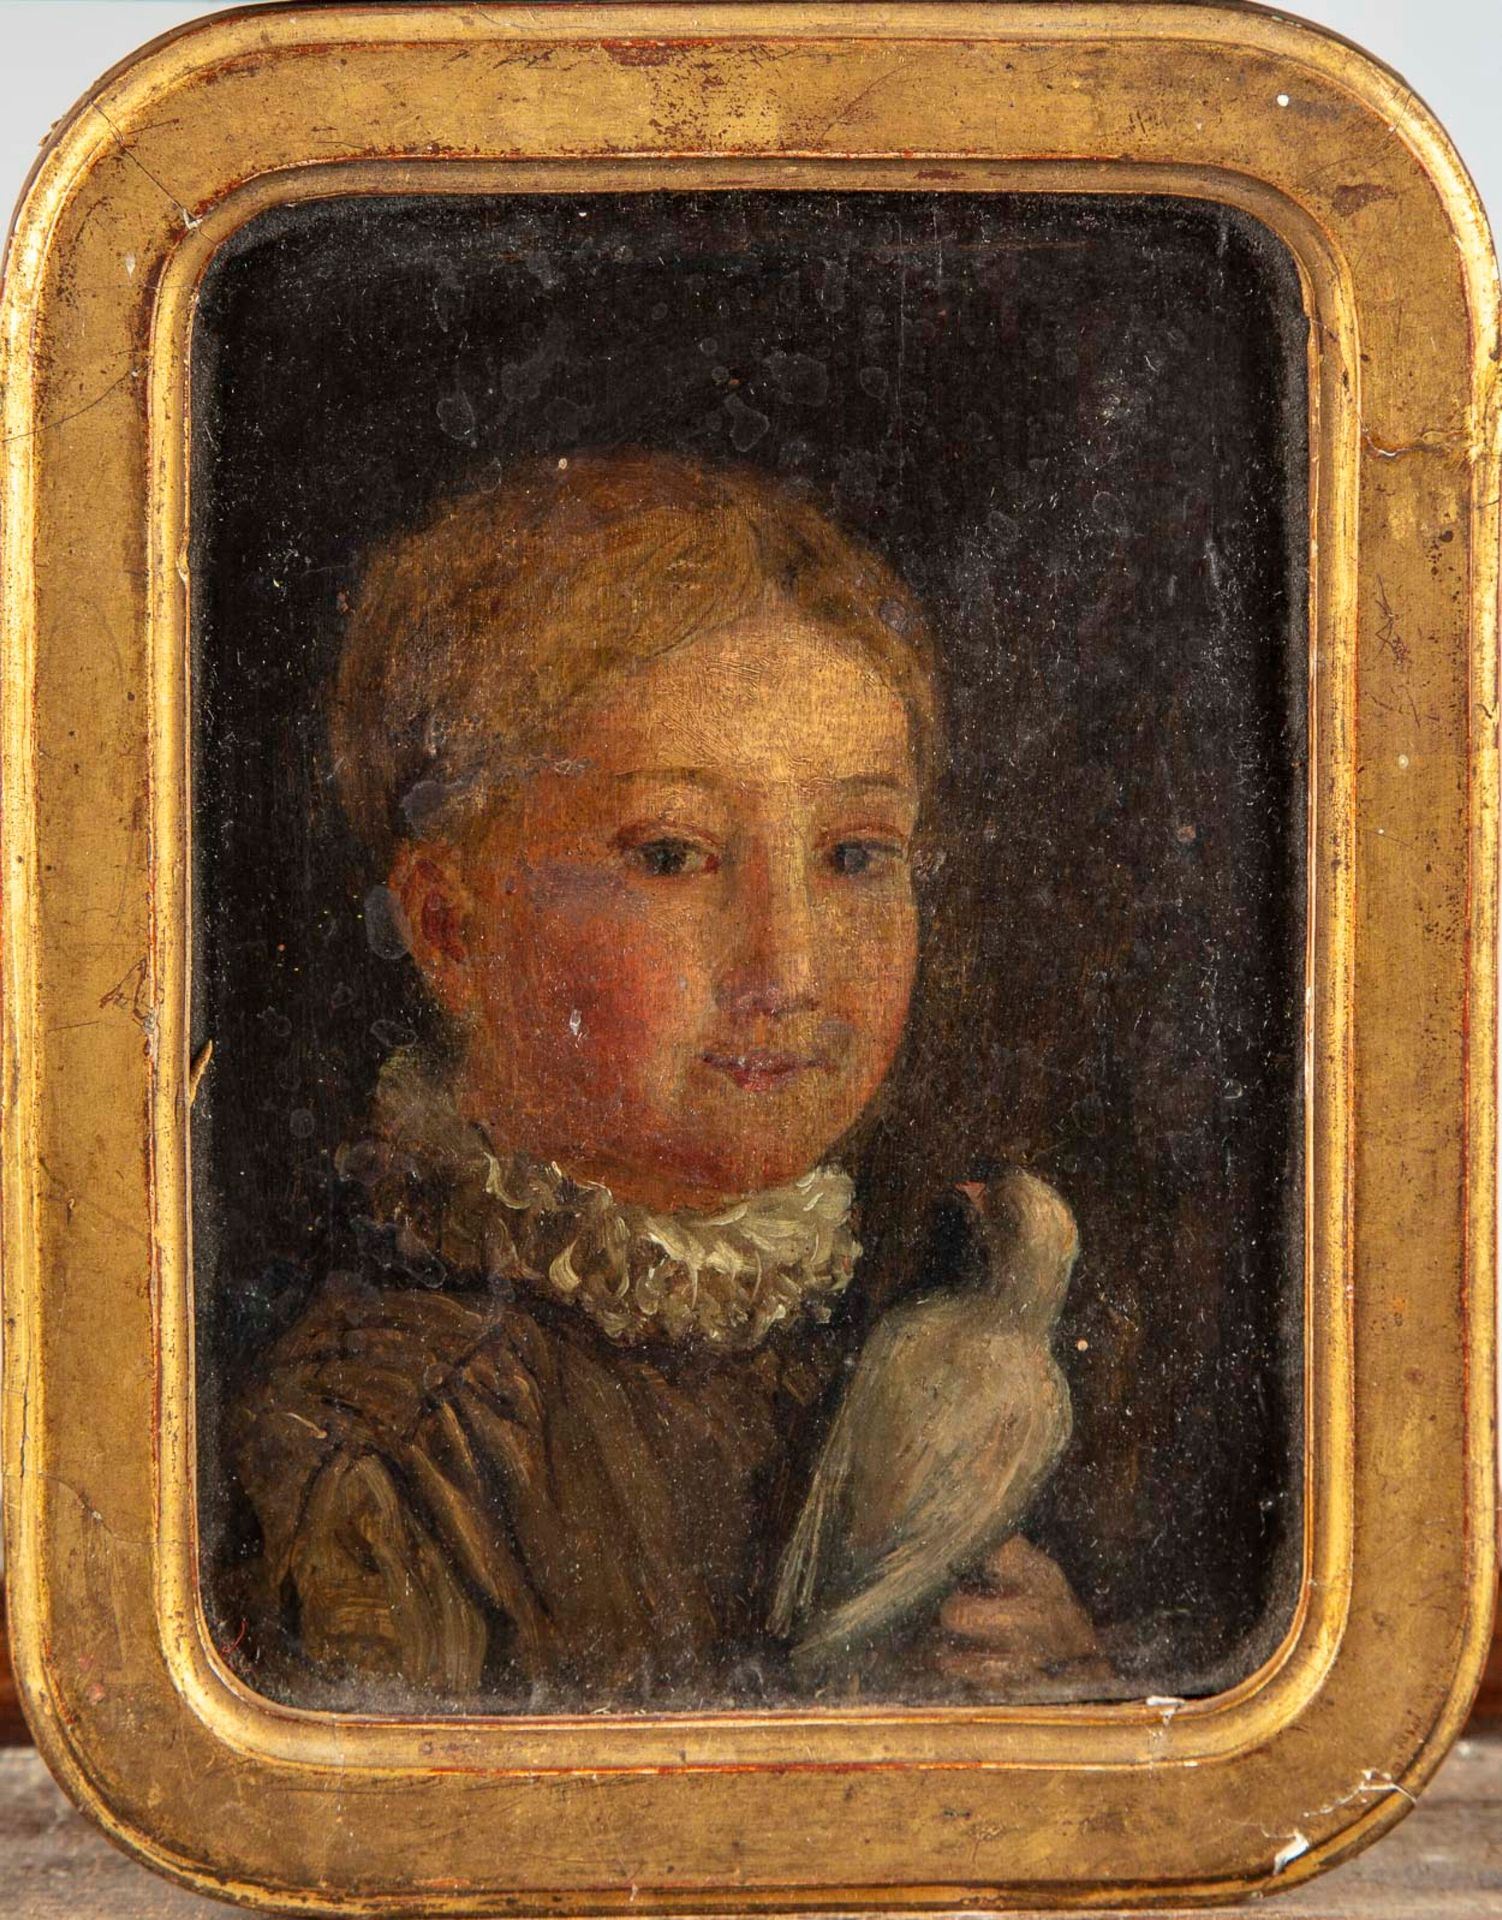 ECOLE FRANCAISE XIXè FRENCH SCHOOL of the 19th century 

Portrait of a child wit&hellip;